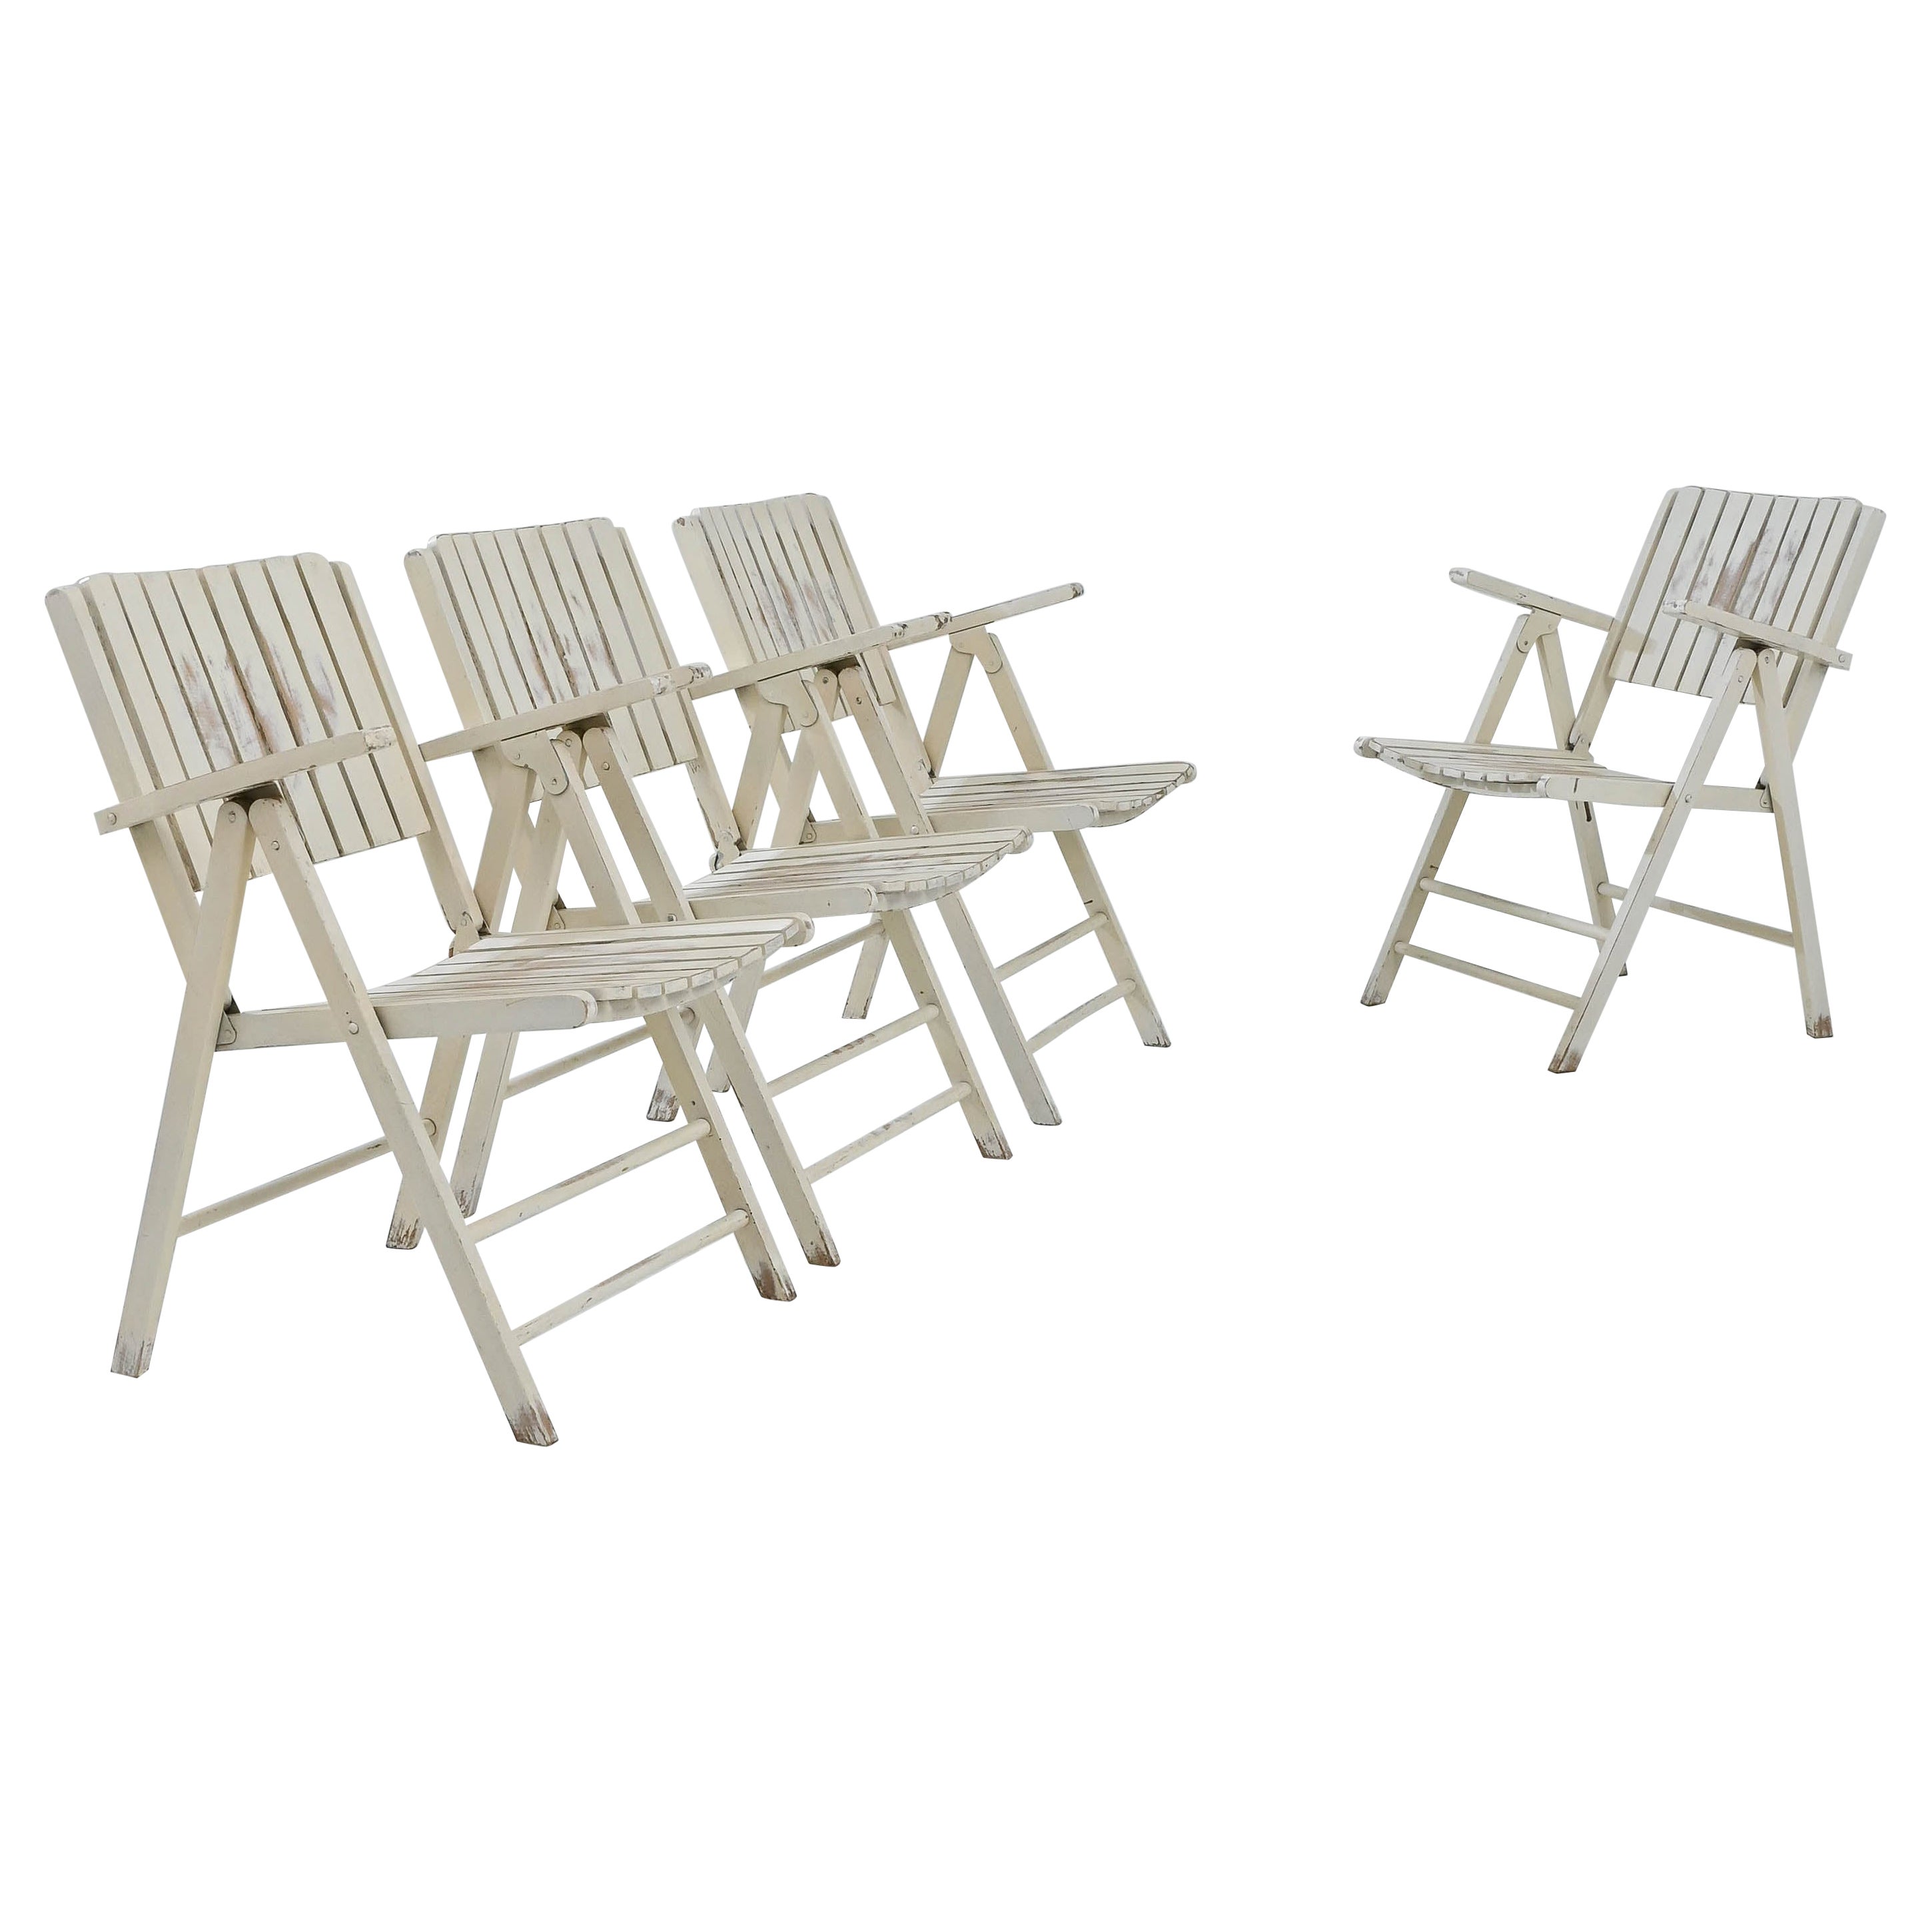 20th Century French Wooden Garden Chairs, Set of Four